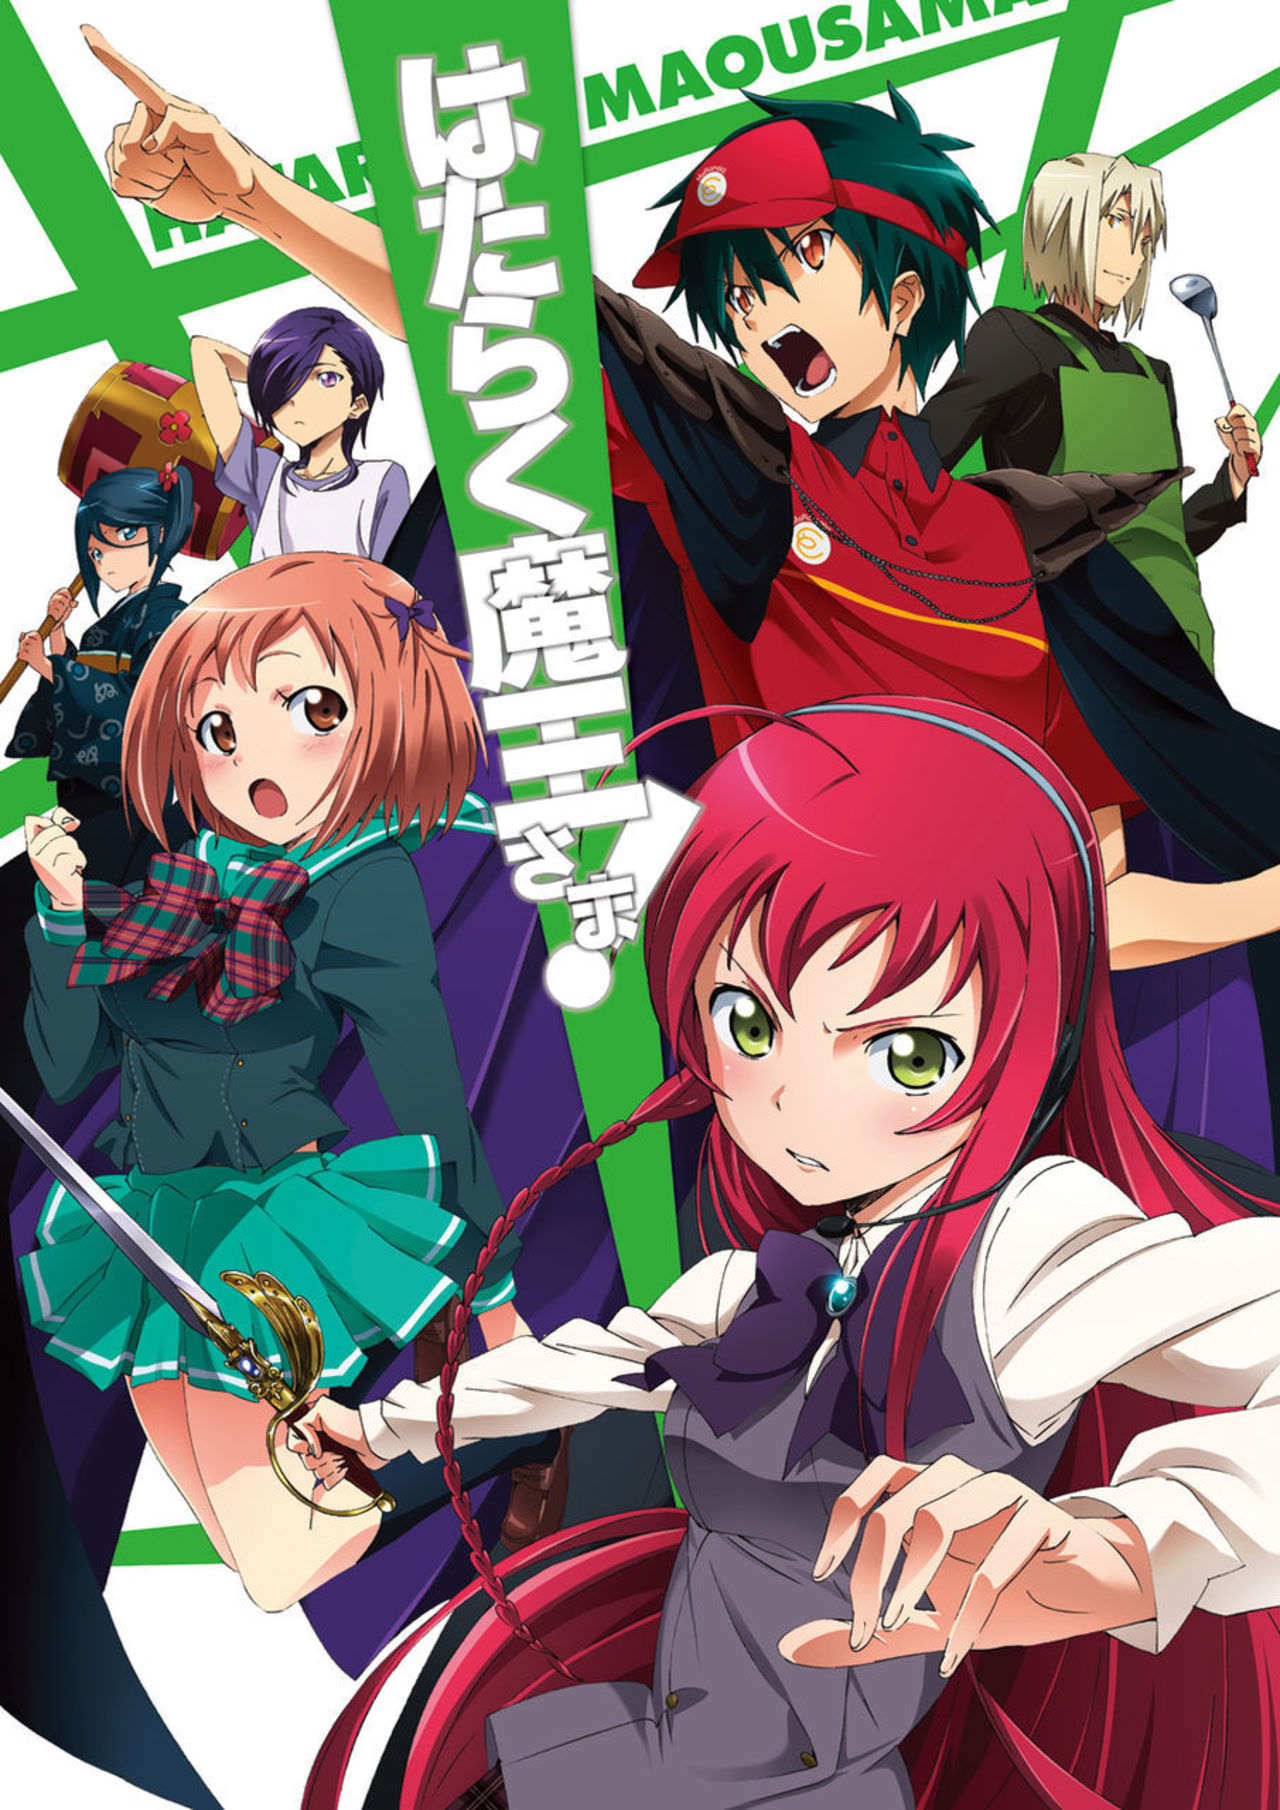 The Devil Is a Part-Timer! - streaming online